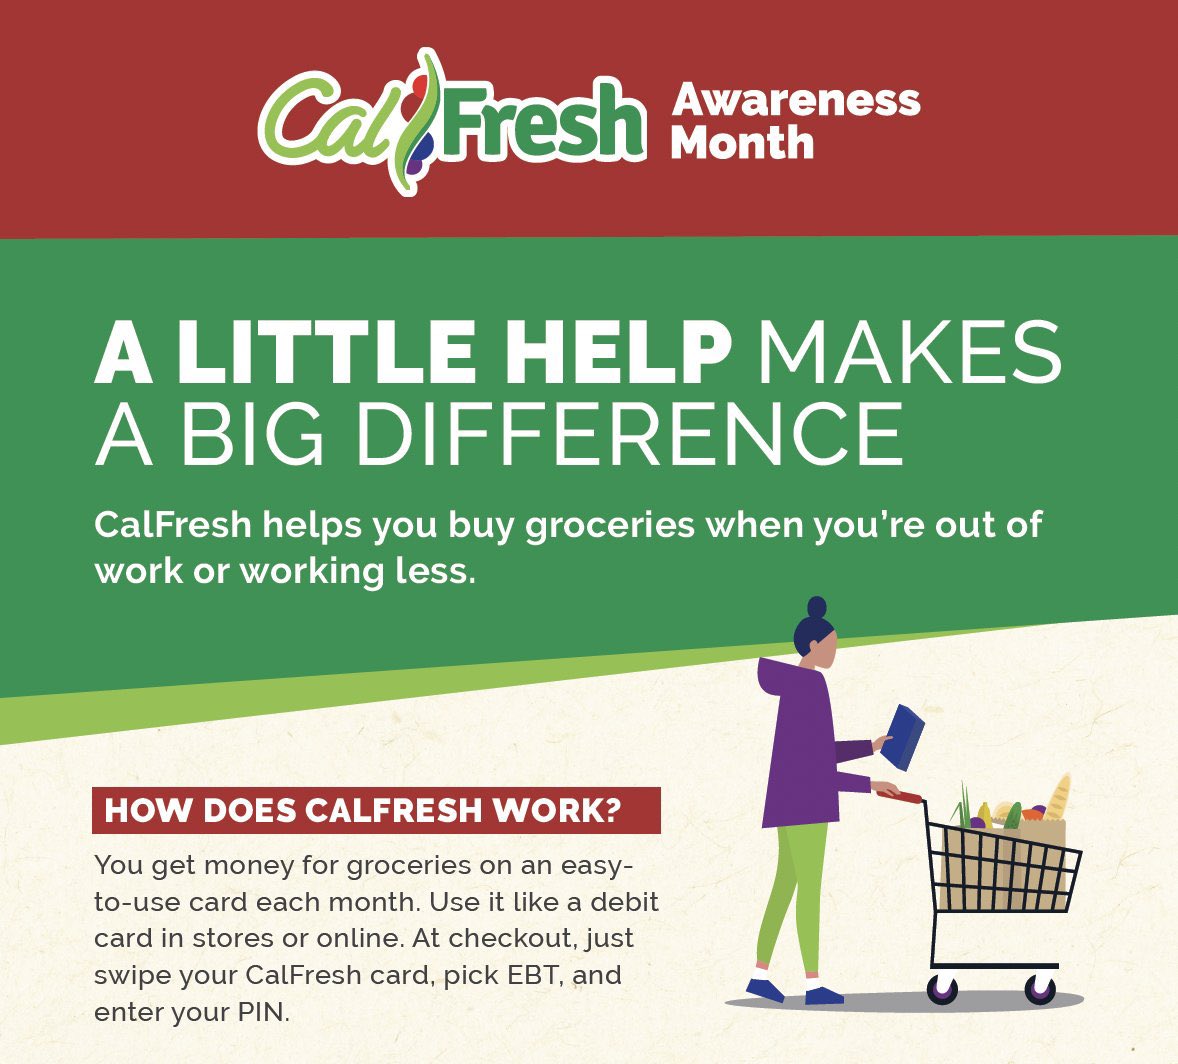 The CalFresh Food program provides electronic benefits that can be used to buy foods at most grocery stores, including Farmers' Markets.

Apply at htps://benefitscal.com/ or call 211
#CalFreshAwarenessMonth